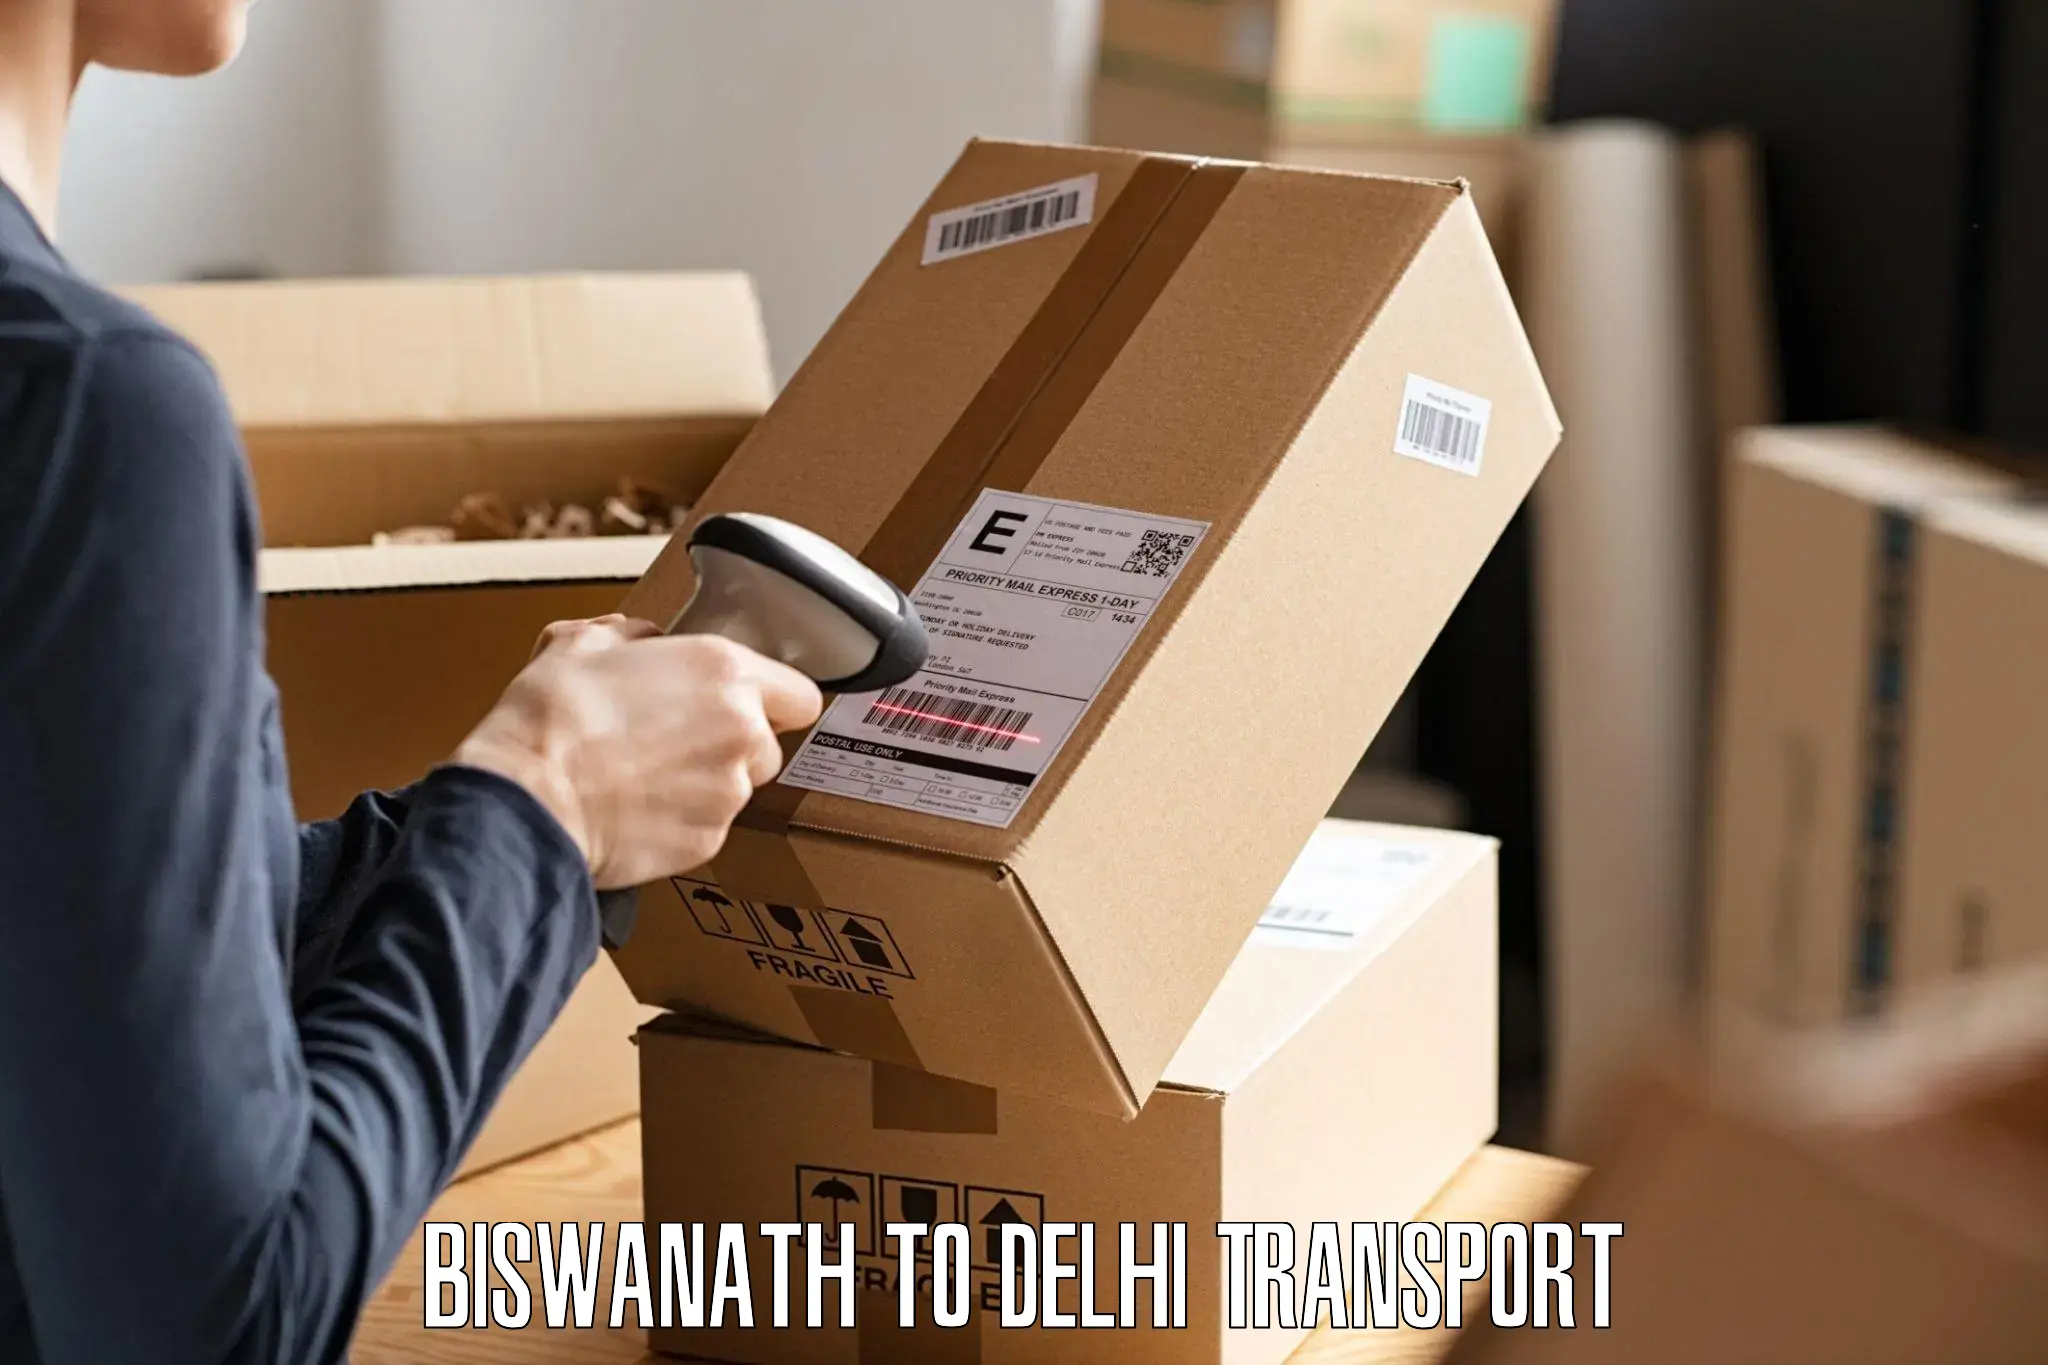 Daily transport service in Biswanath to Burari